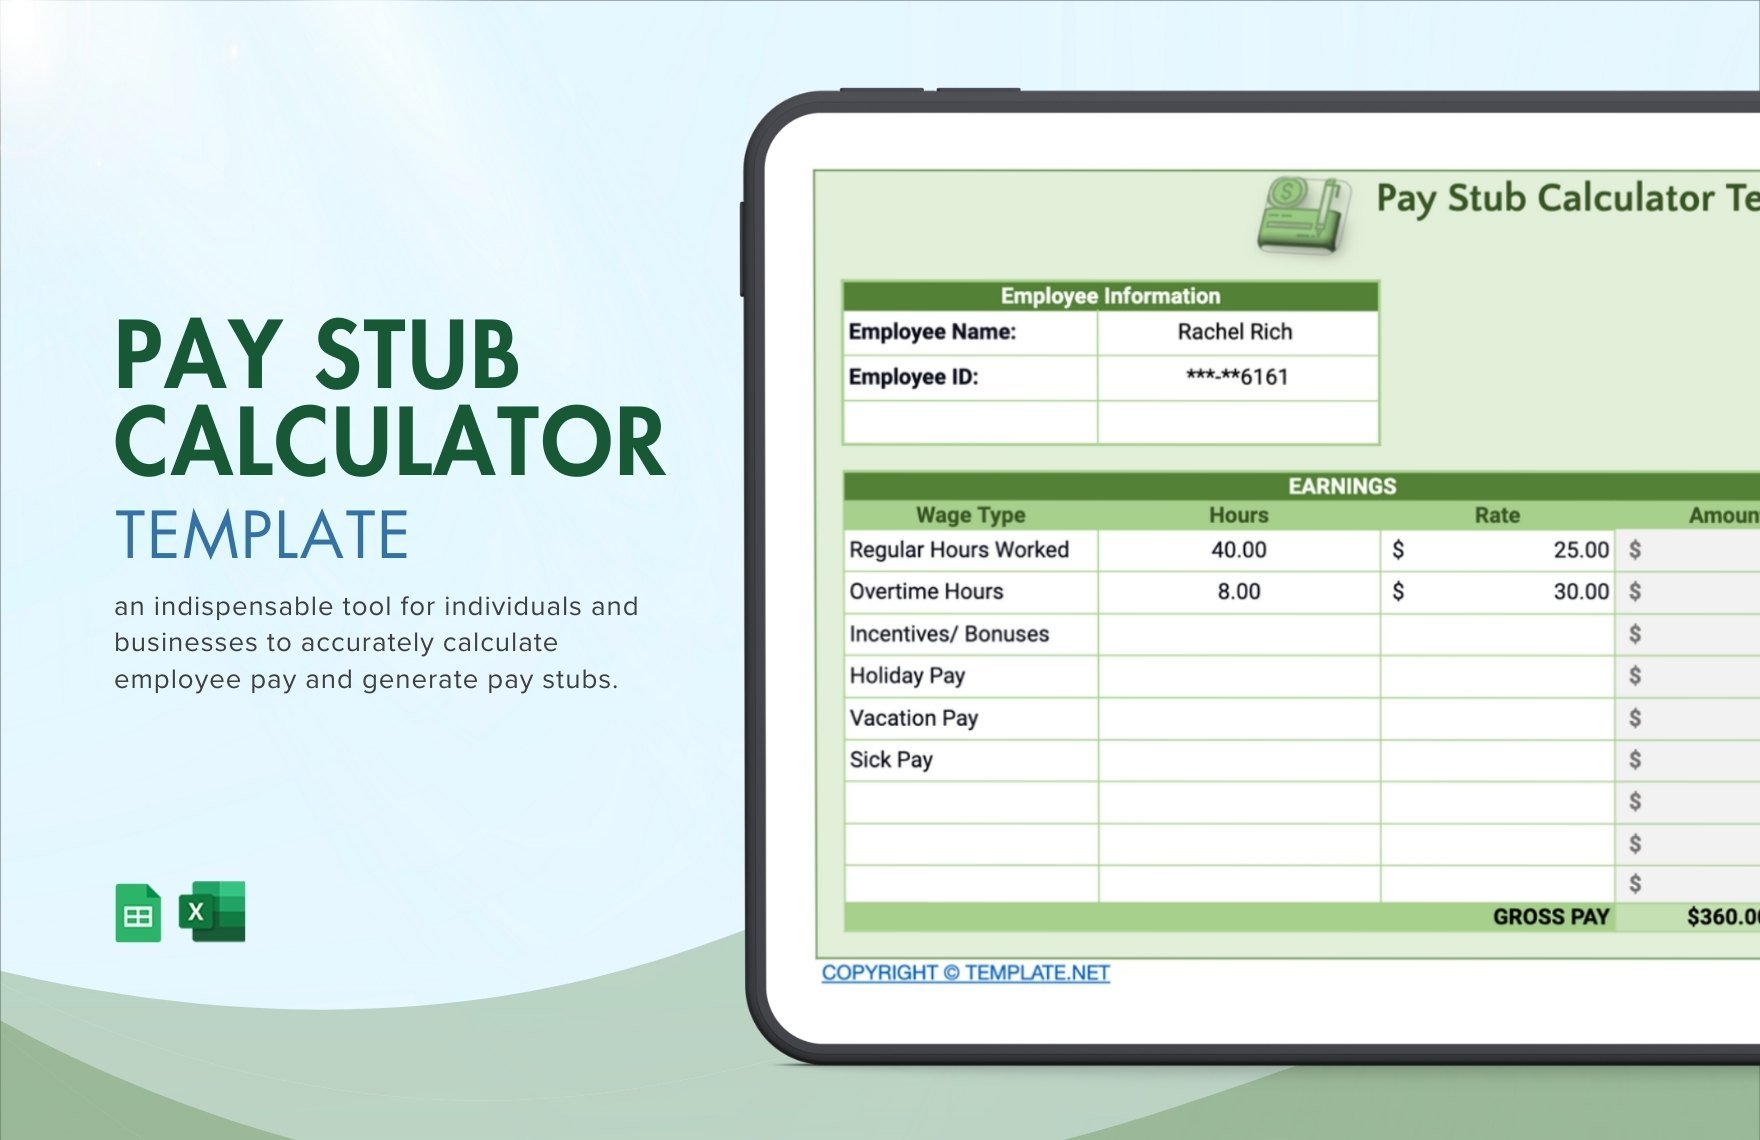 Pay Stub Calculator Template in Excel, Google Sheets